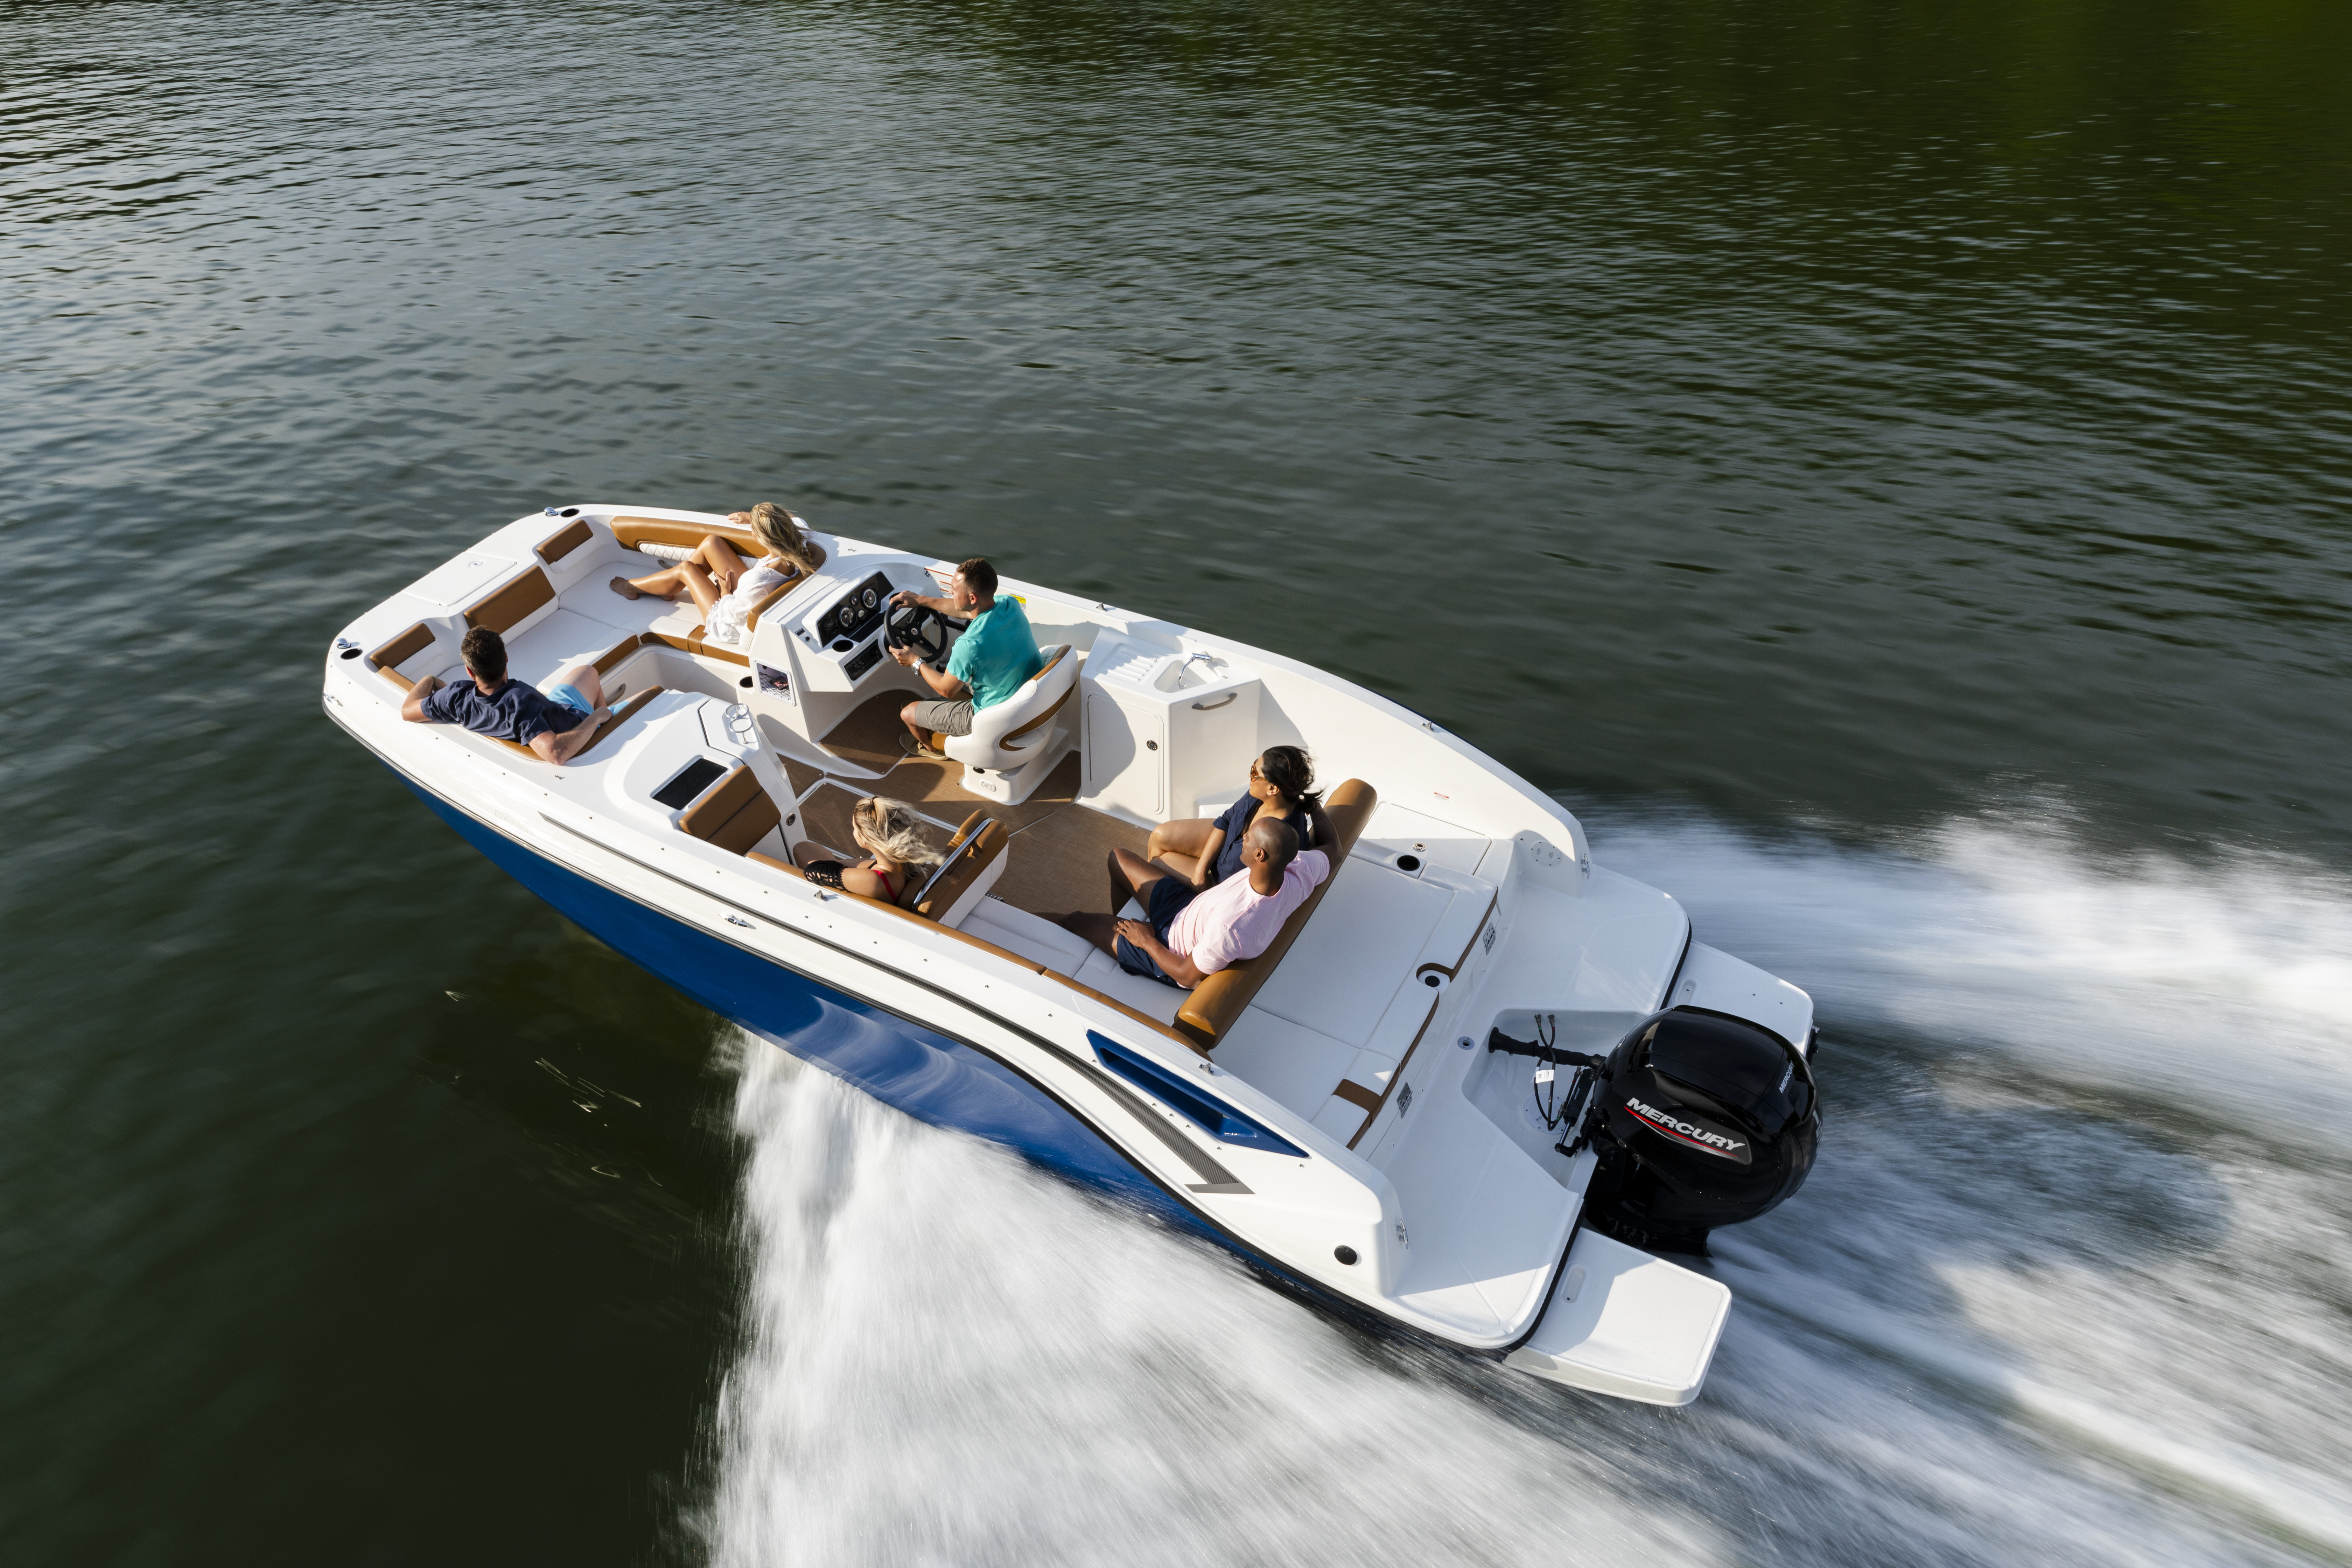 360 VR Virtual Tours of the Bayliner DX2200 Bowrider